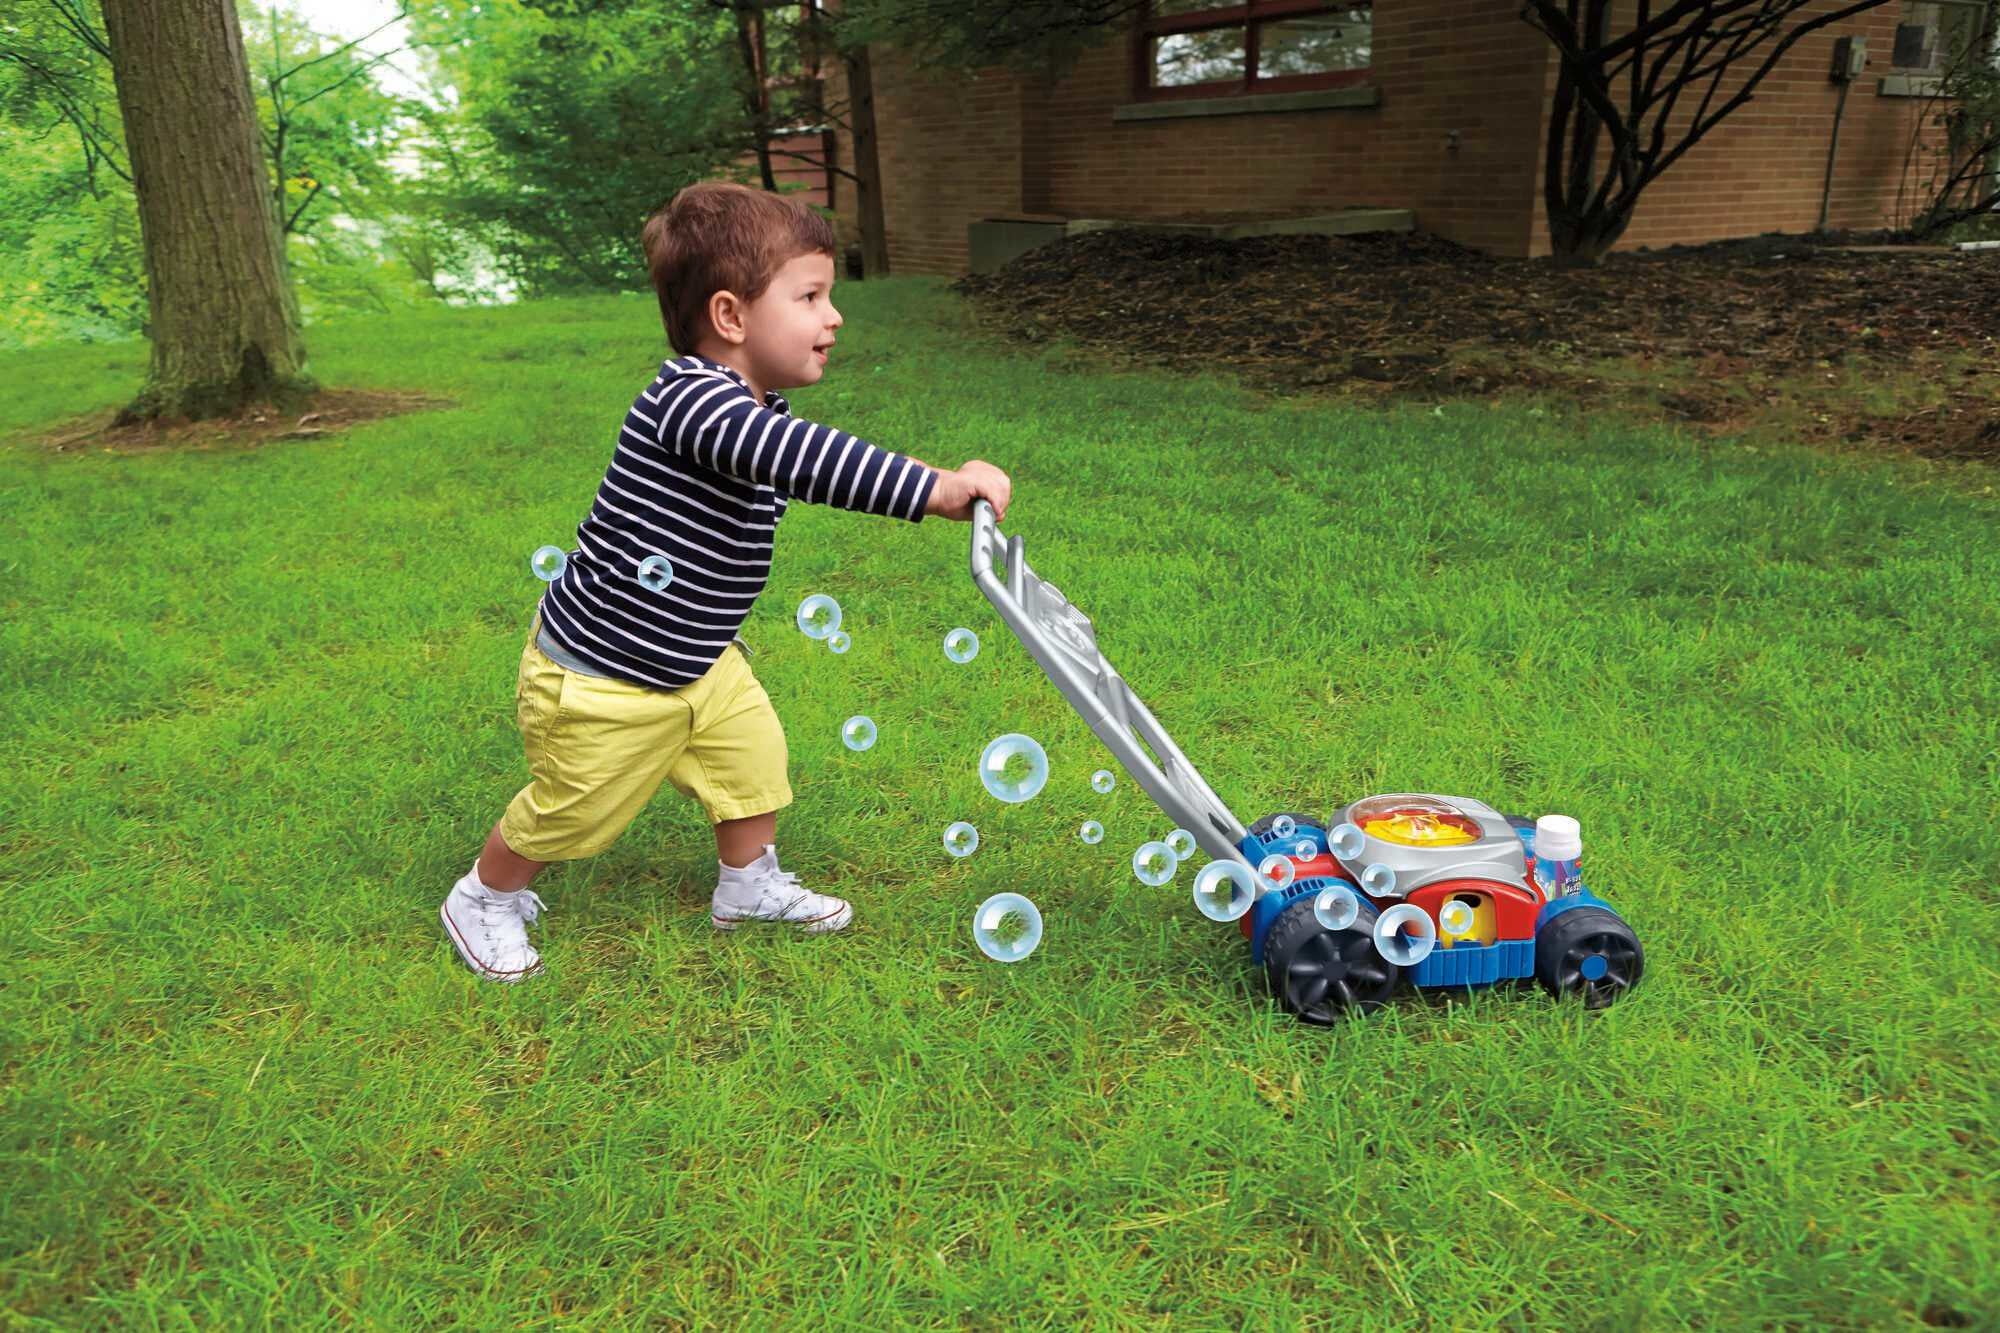 Fisher Price Bubble Mower